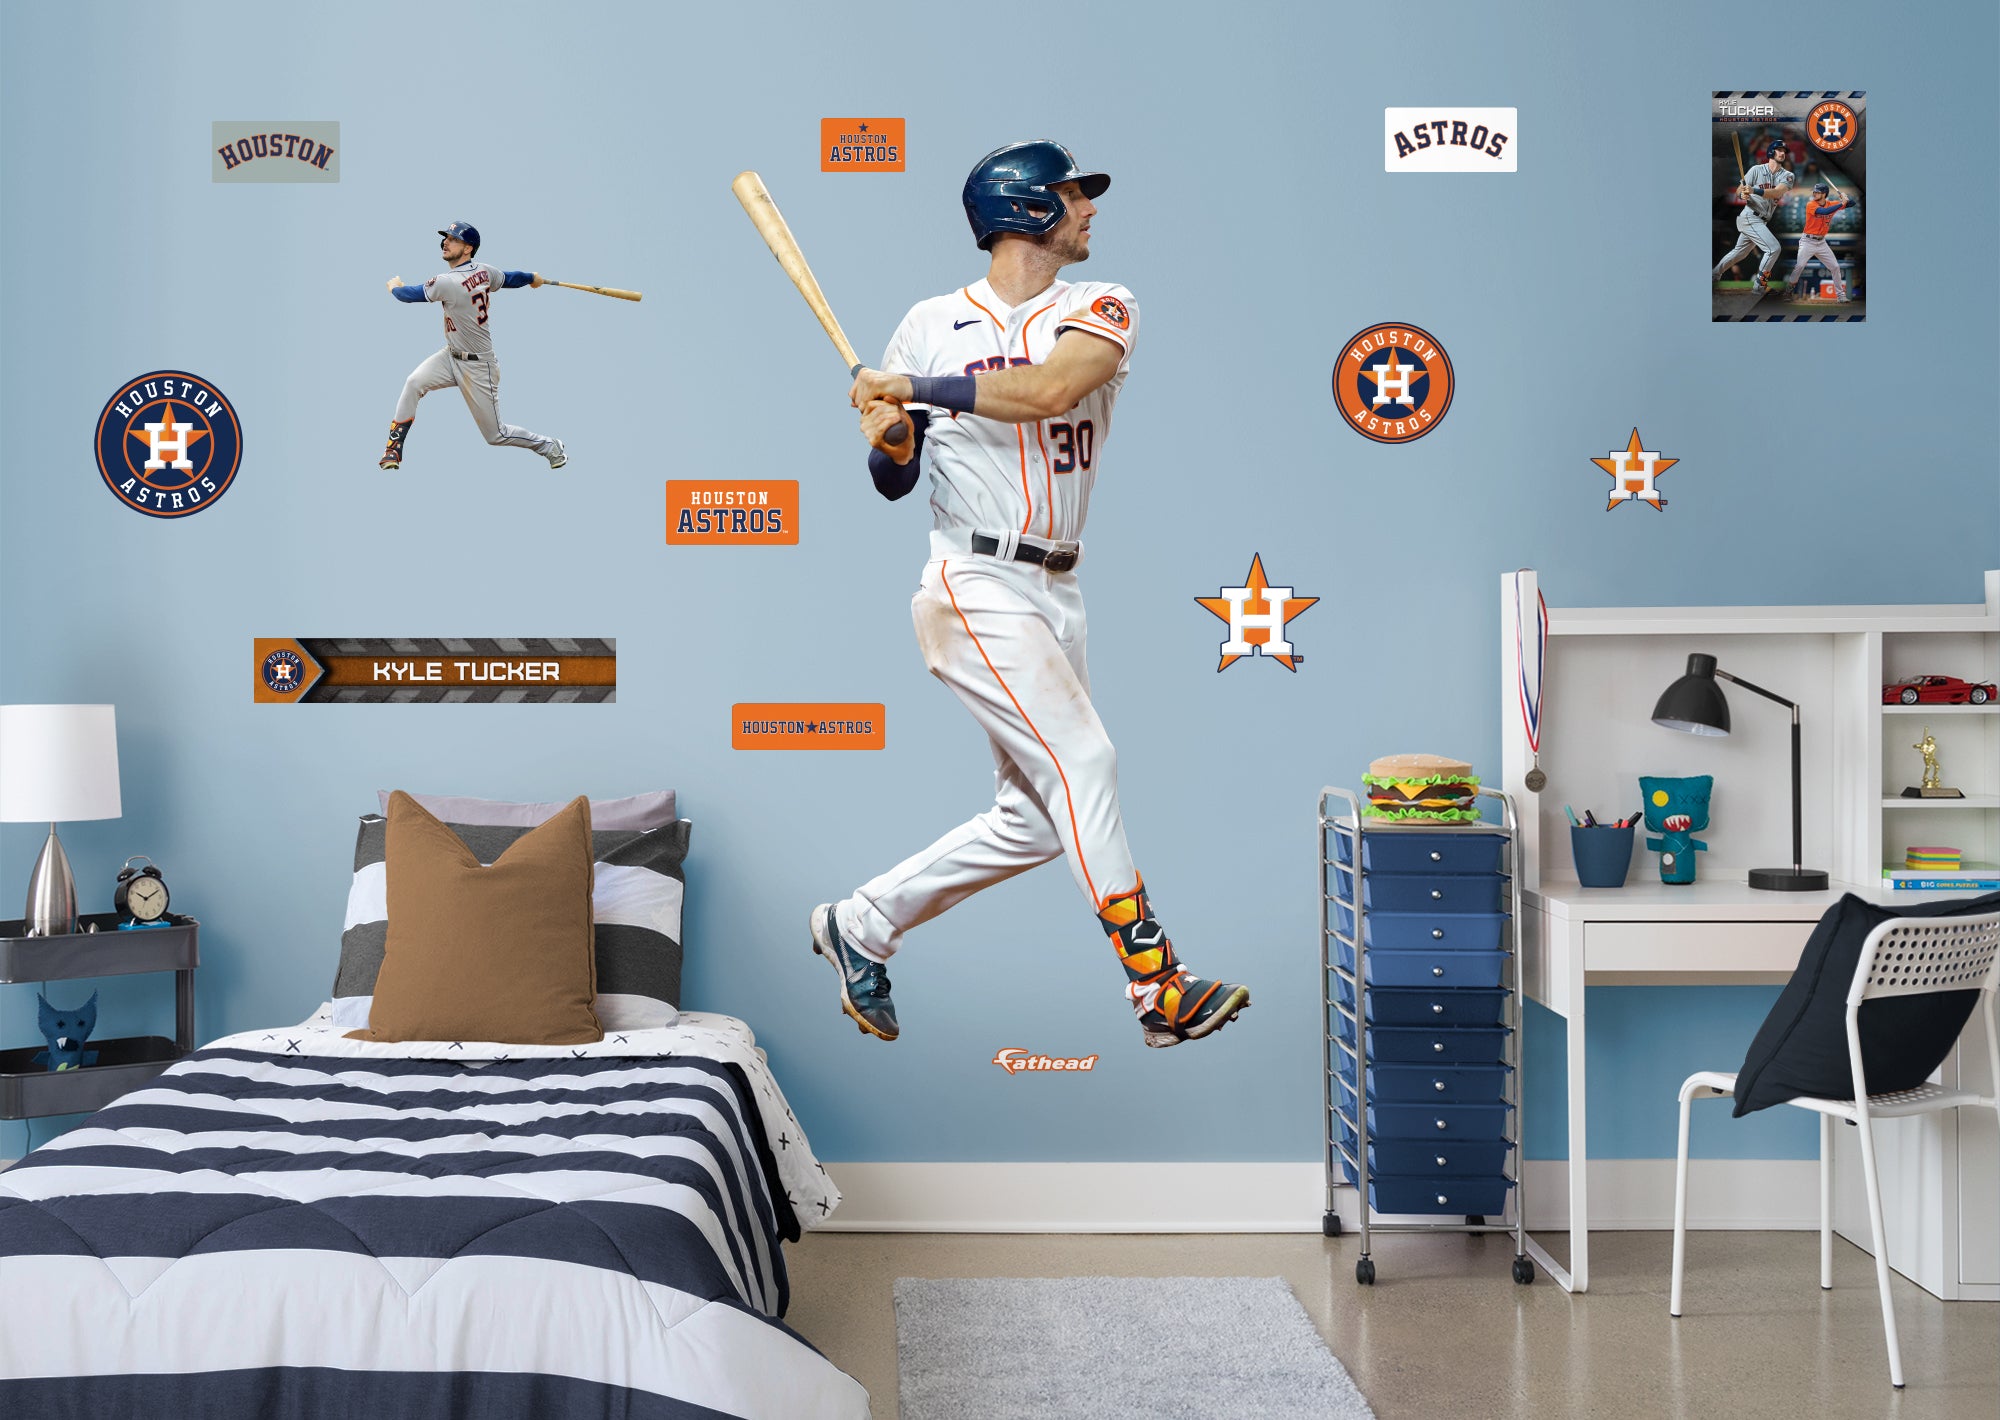  Kyle Tucker Houston Astros Poster Print, Baseball Player, Kyle  Tucker Gift, ArtWork, Canvas Art, Posters for Wall, Real Player SIZE  24''x32'' (61x81 cm): Posters & Prints